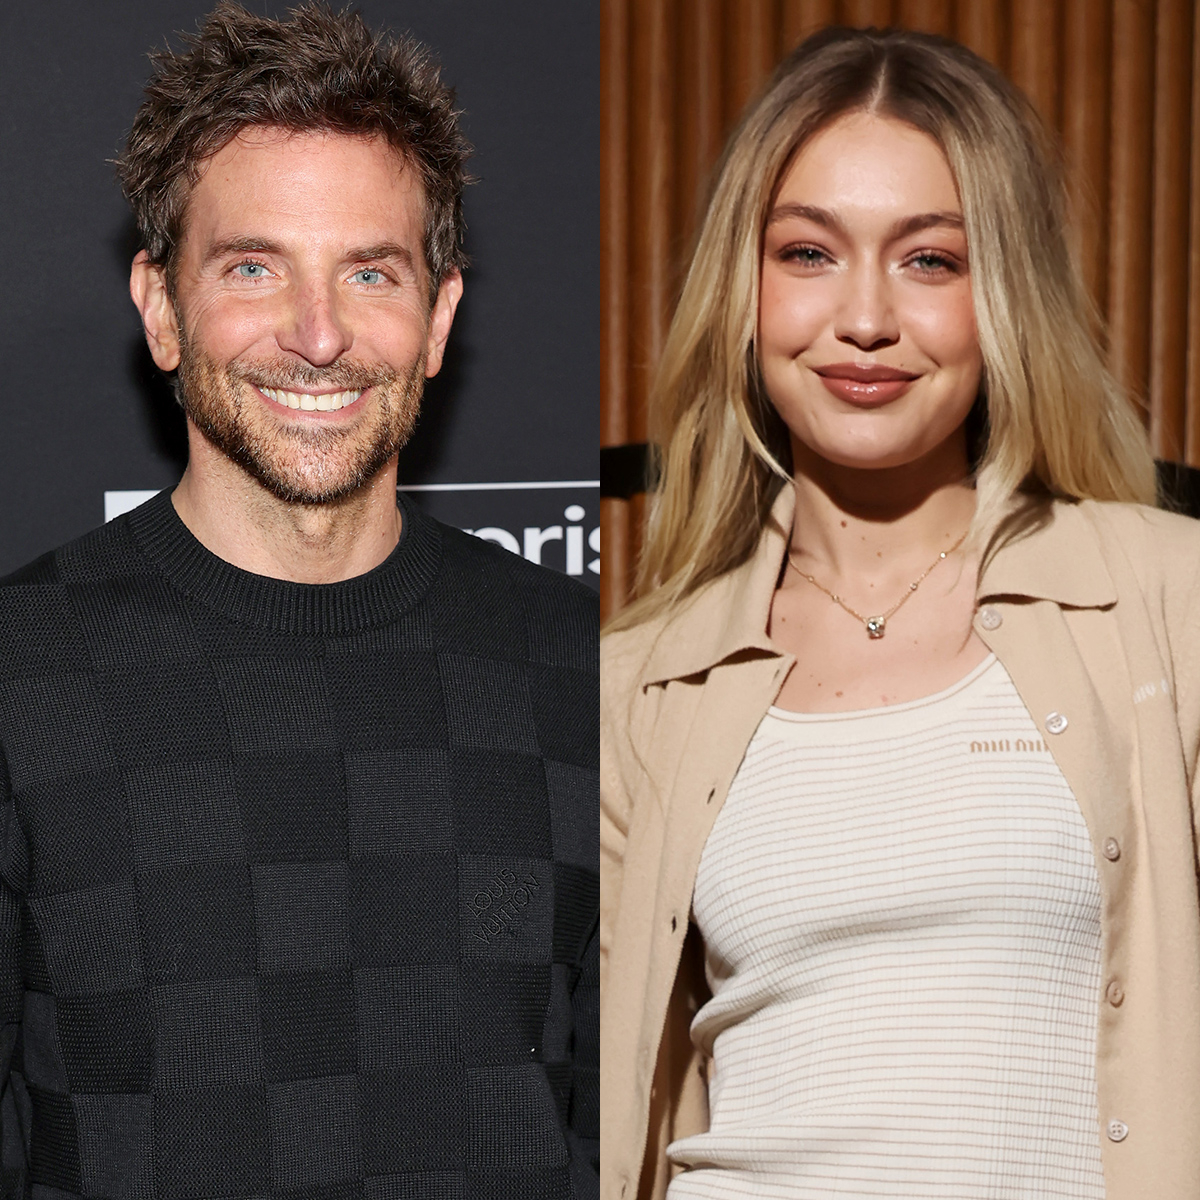 Bradley Cooper and Gigi Hadid Seal Their Romance With a